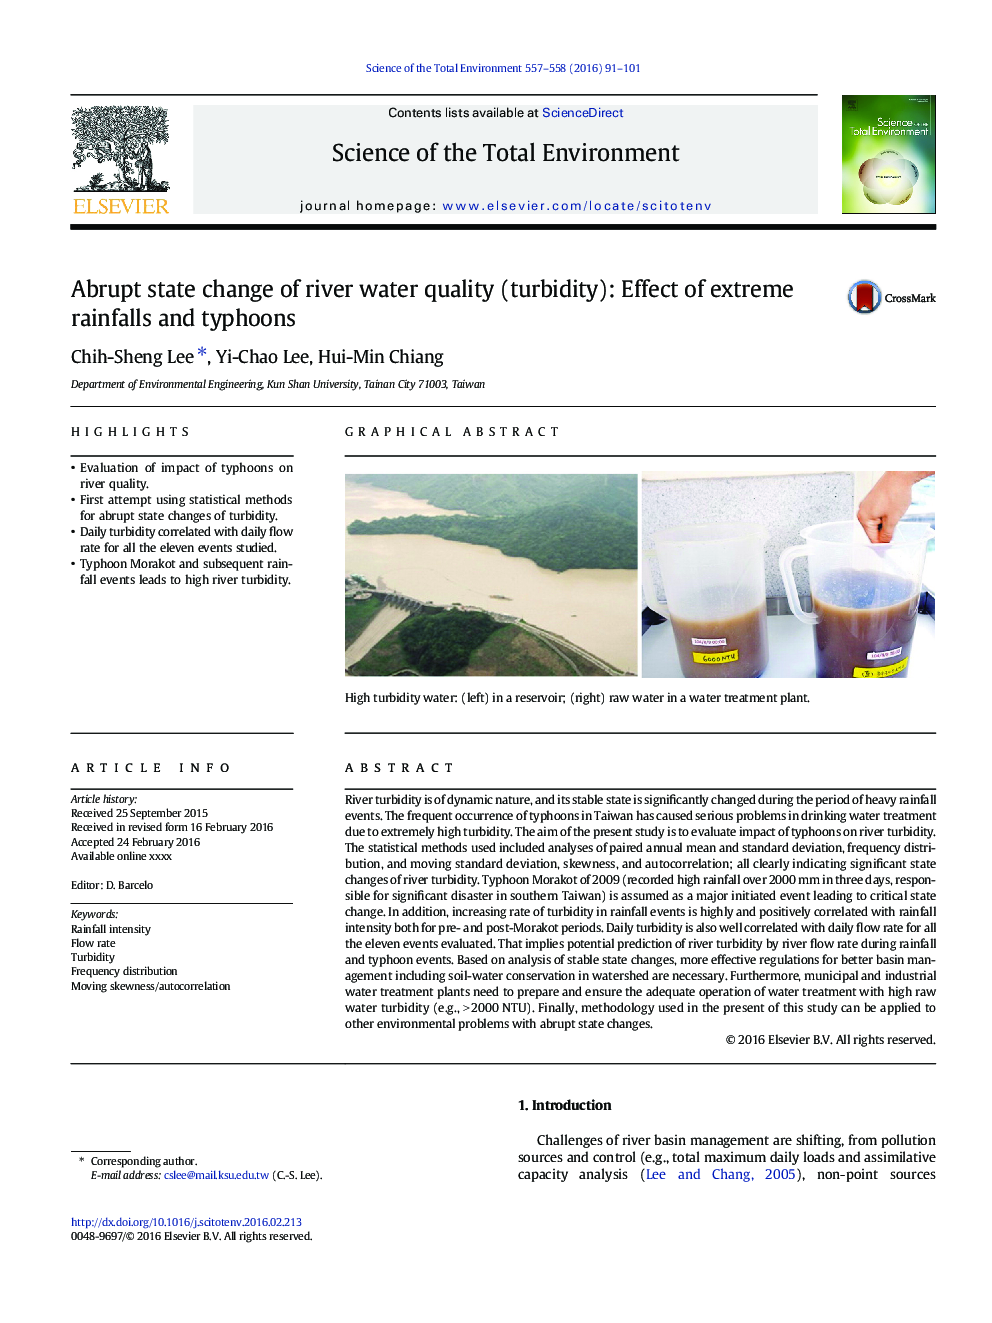 Abrupt state change of river water quality (turbidity): Effect of extreme rainfalls and typhoons